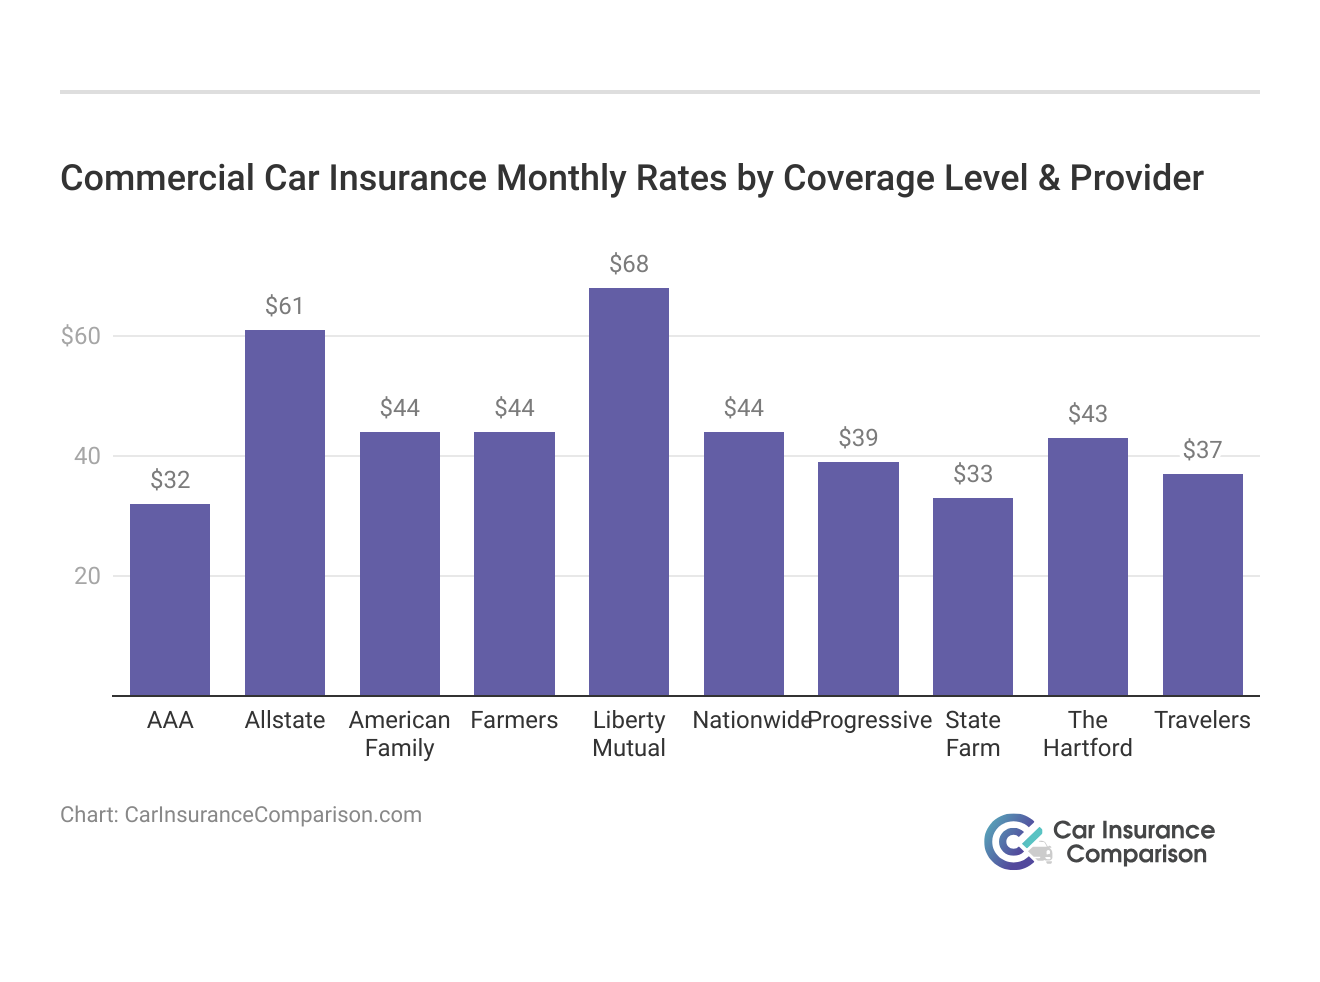 <h3>Commercial Car Insurance Monthly Rates by Coverage Level & Provider</h3>